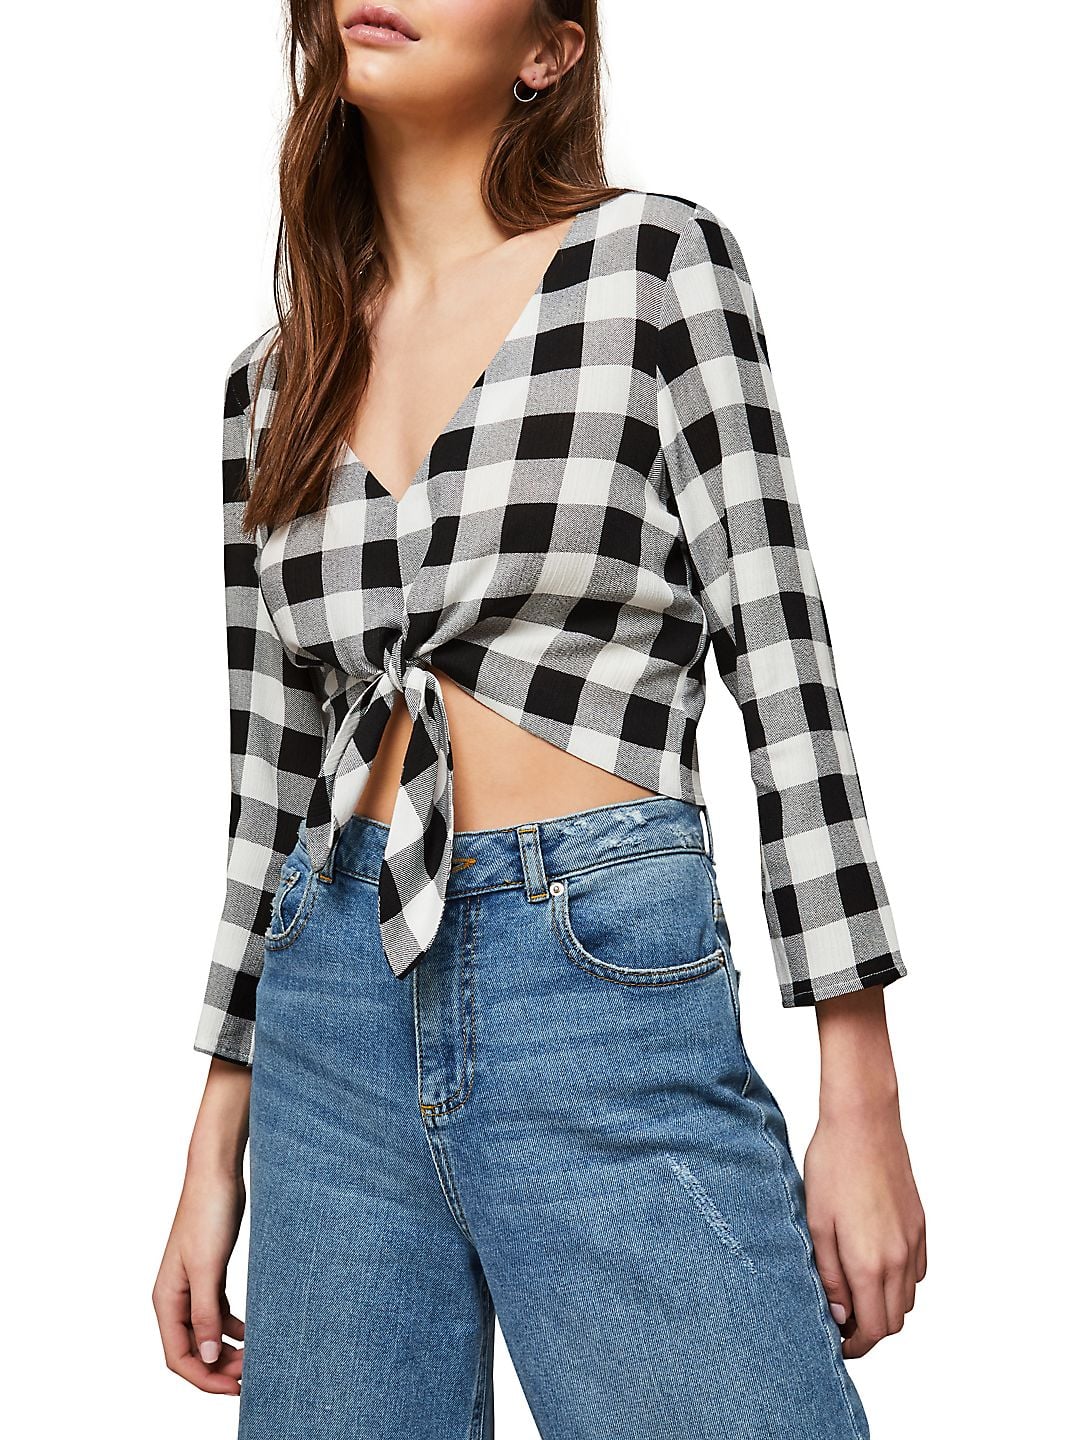 godt Veluddannet famlende Miss Selfridge Mono Crop Top | Trust Us — You'll Want These 11 Stylish Tops  For Summer, and They're All Under $40 | POPSUGAR Fashion Photo 2